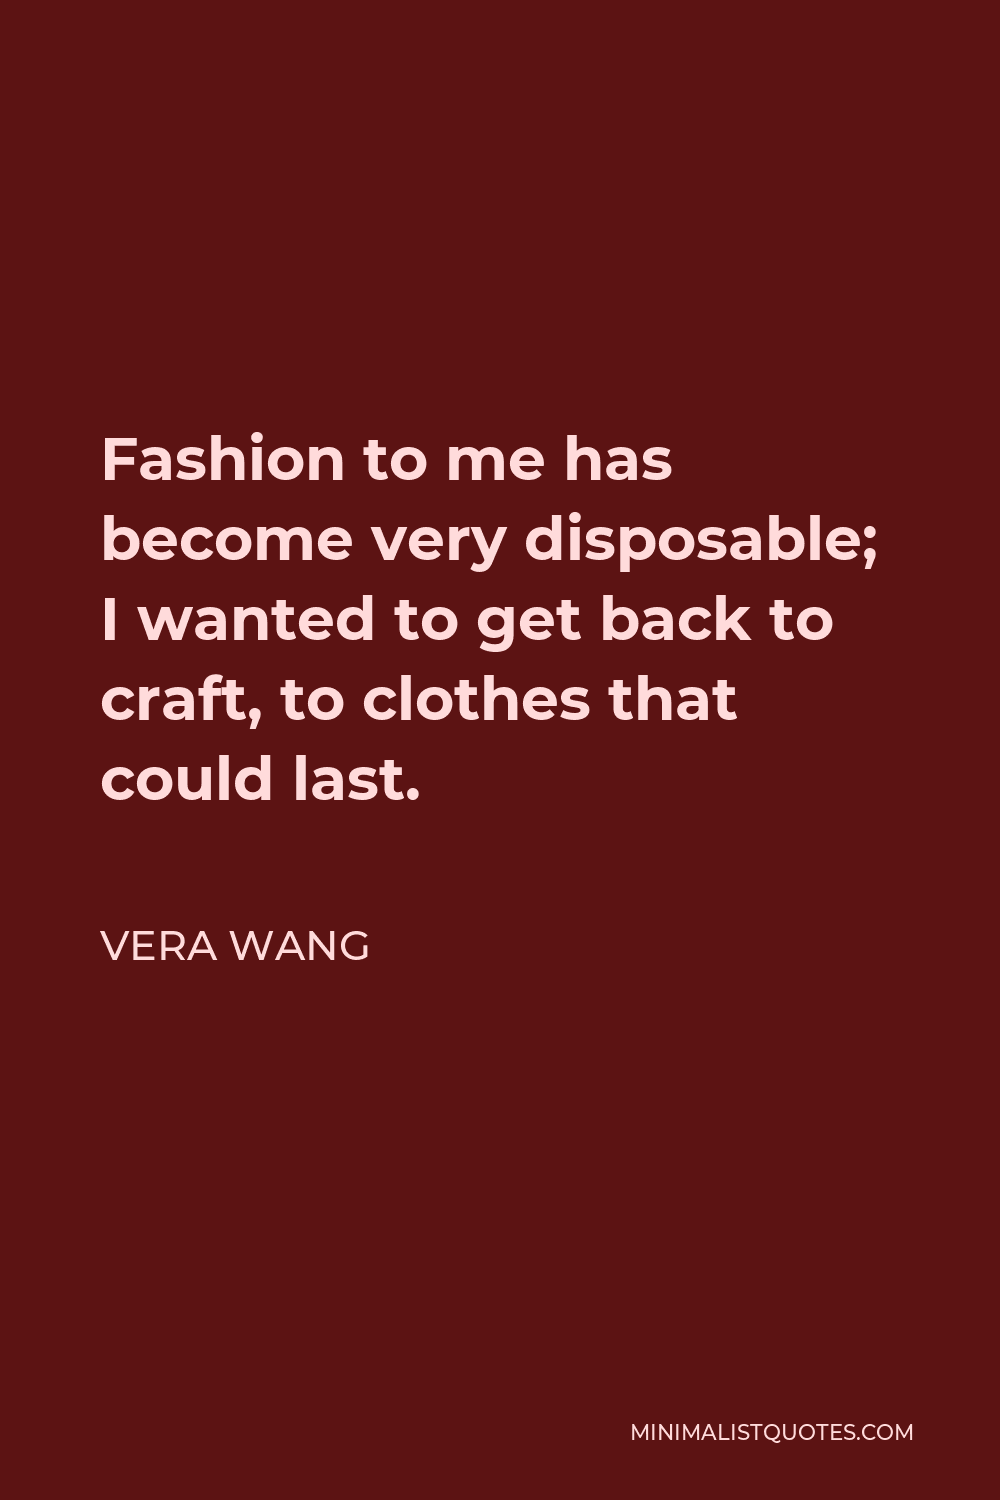 Vera Wang Quote - Fashion to me has become very disposable; I wanted to get back to craft, to clothes that could last.